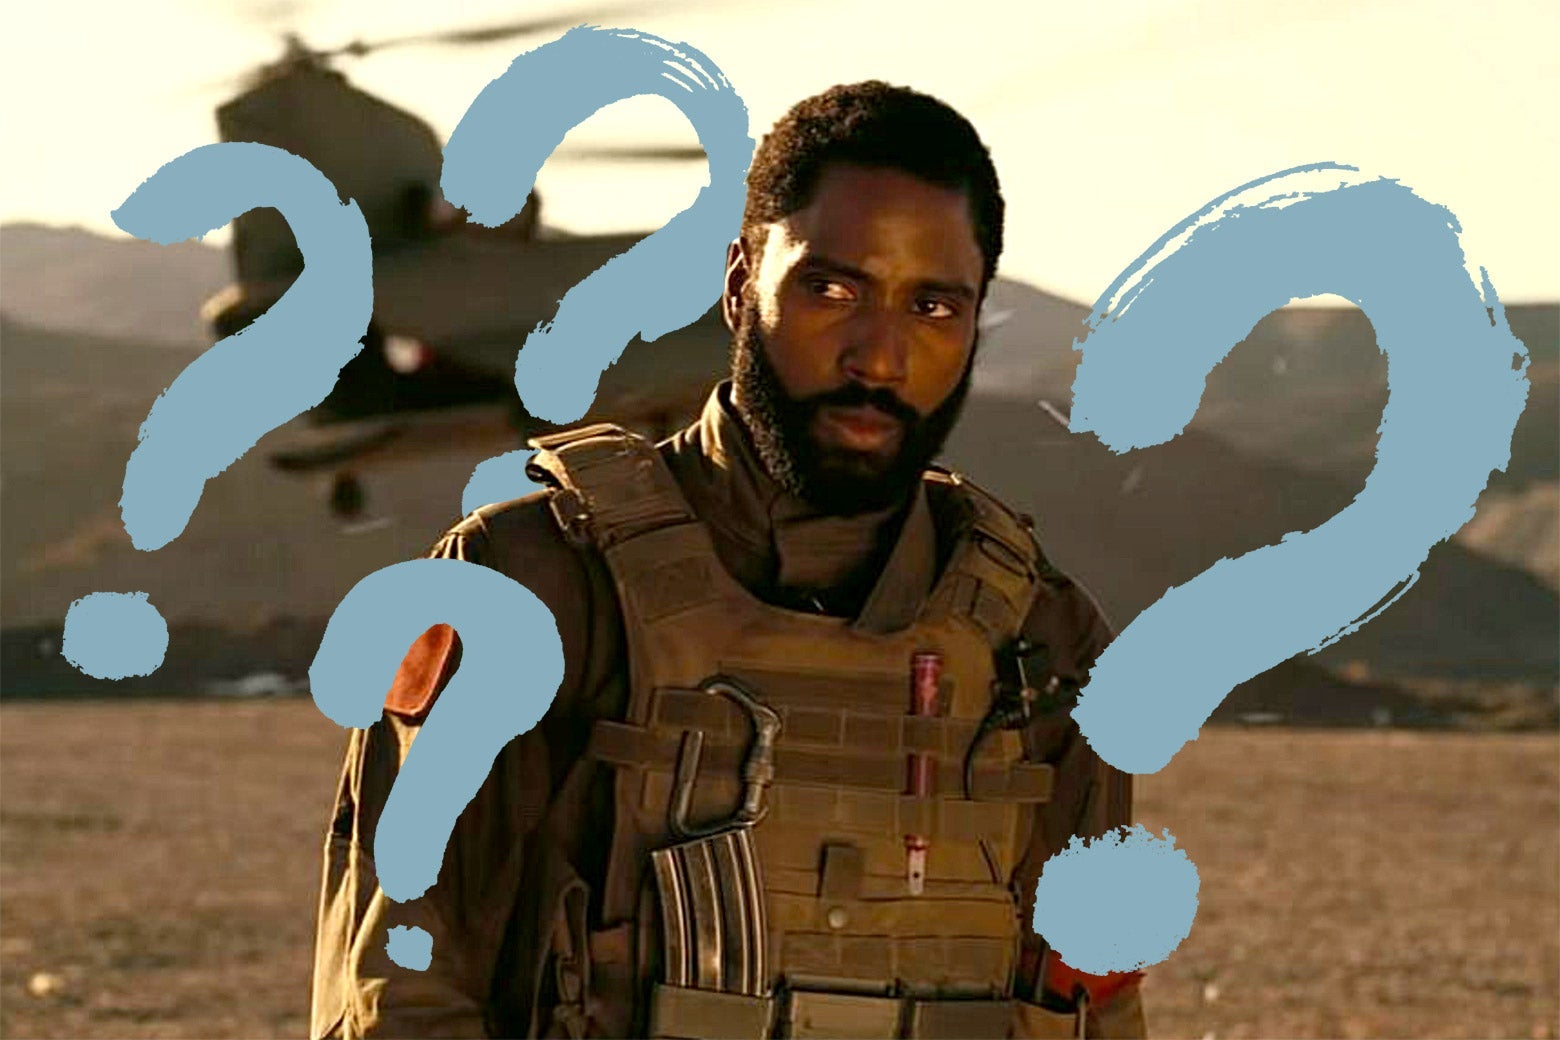 John David Washington in Tenet with questions marks over the image.